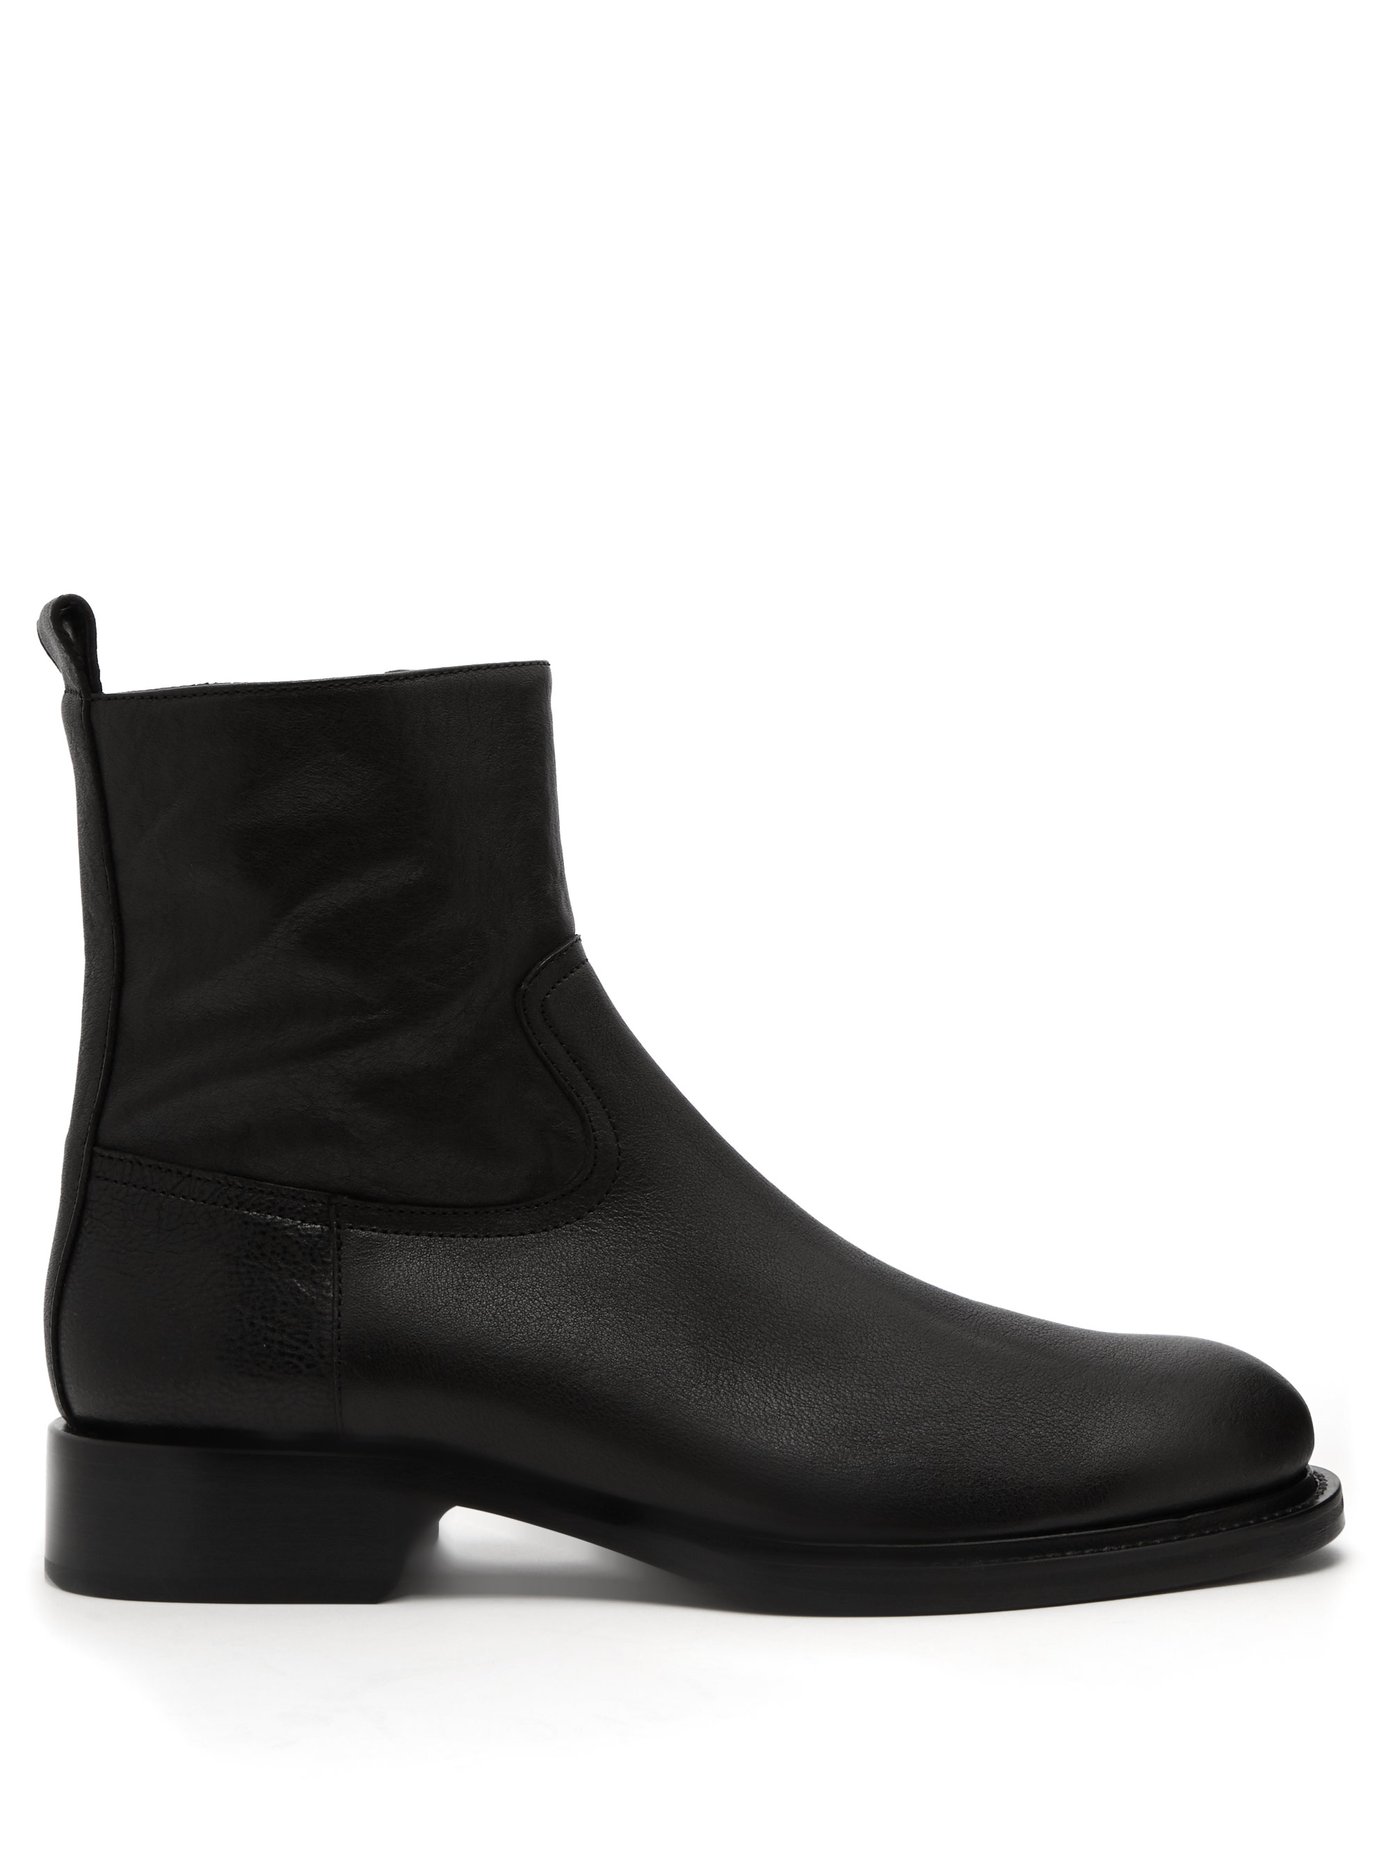 Canyon leather ankle boots | Ann 